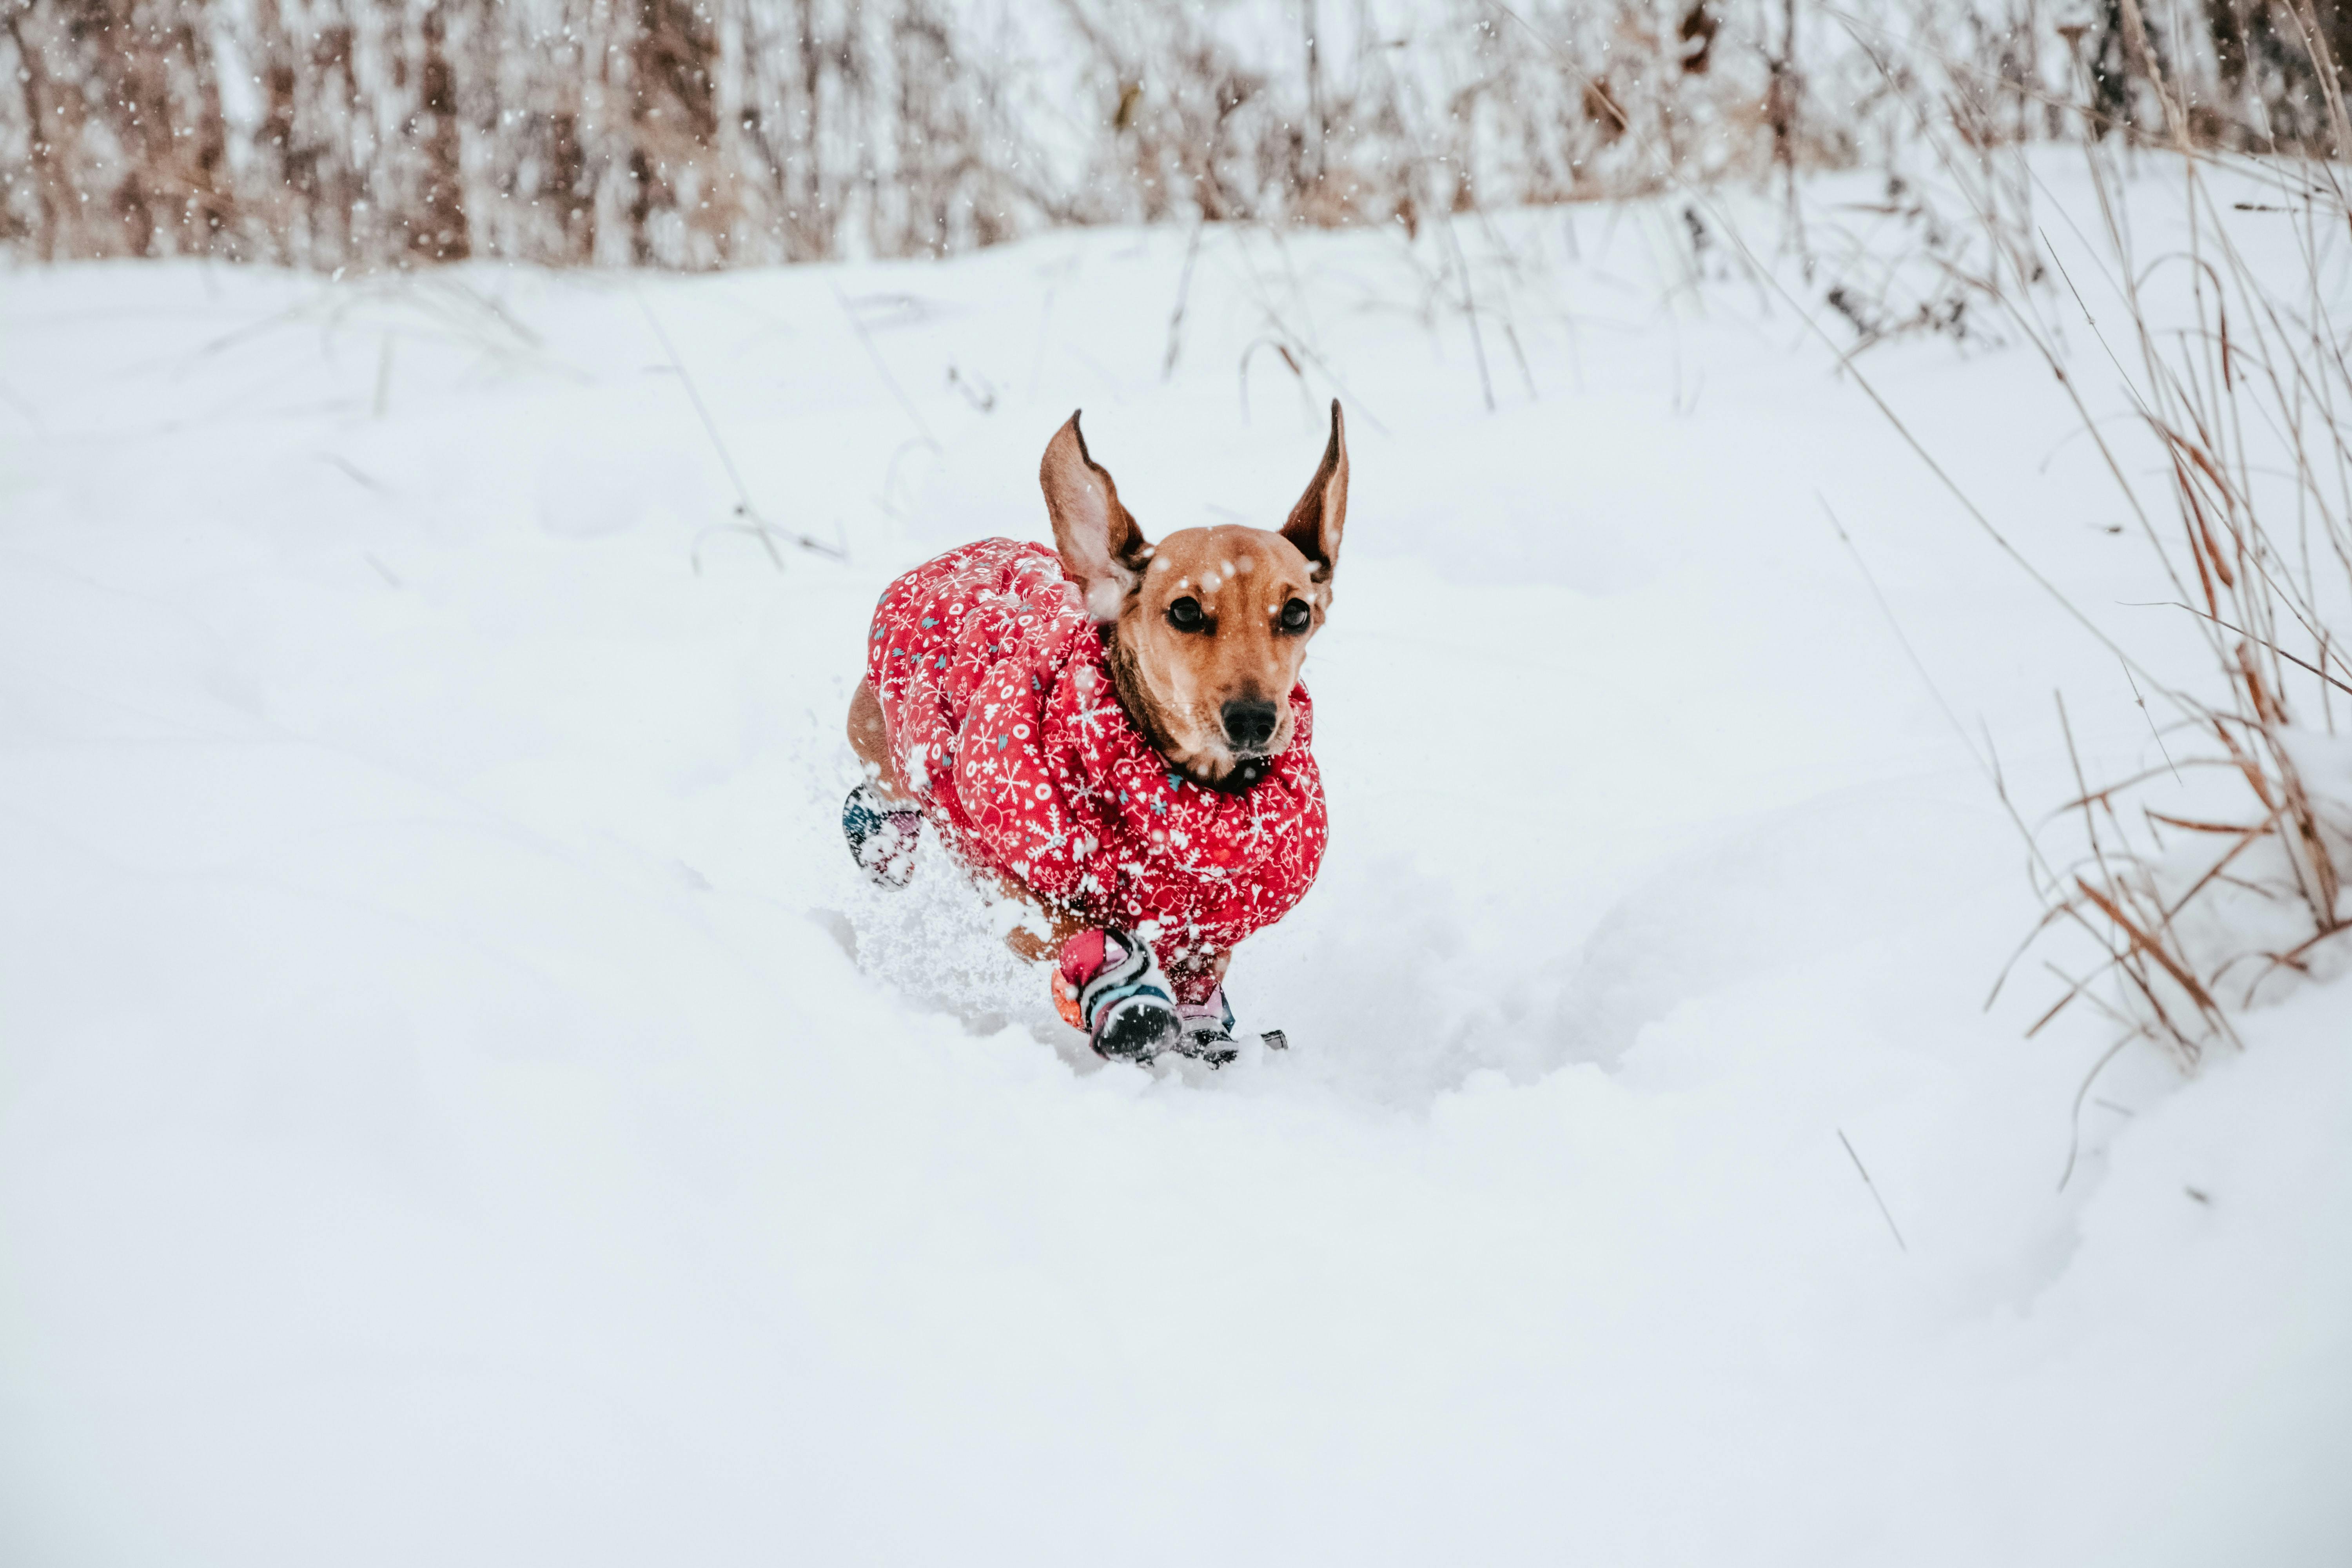 A brown dog in a red sweater and boots runs through the snow